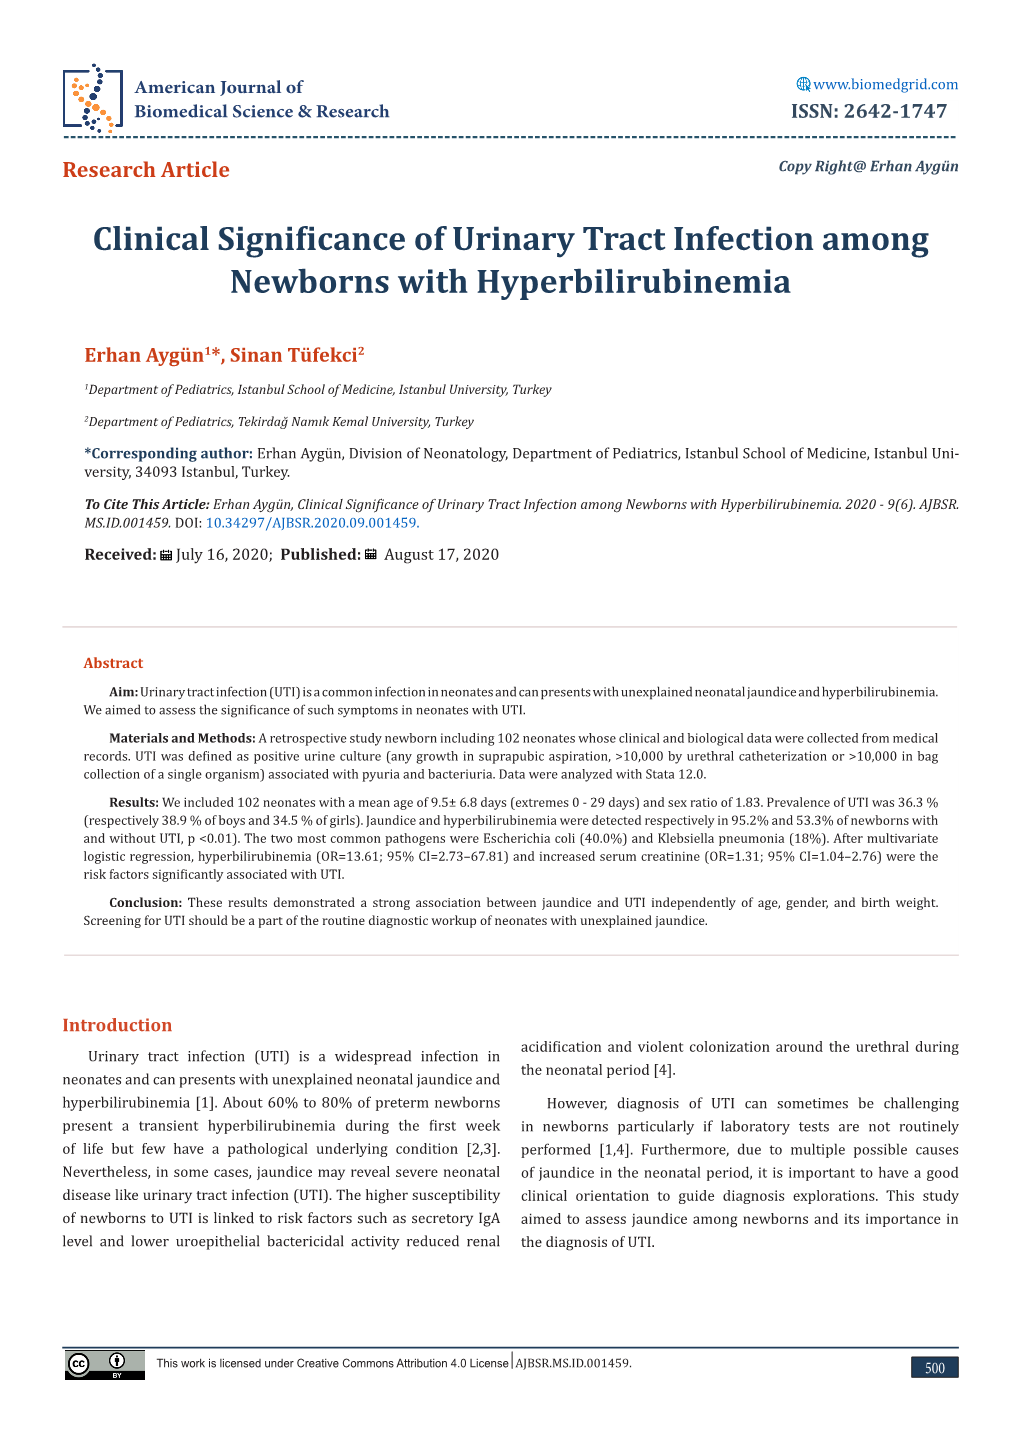 Clinical Significance of Urinary Tract Infection Among Newborns with Hyperbilirubinemia